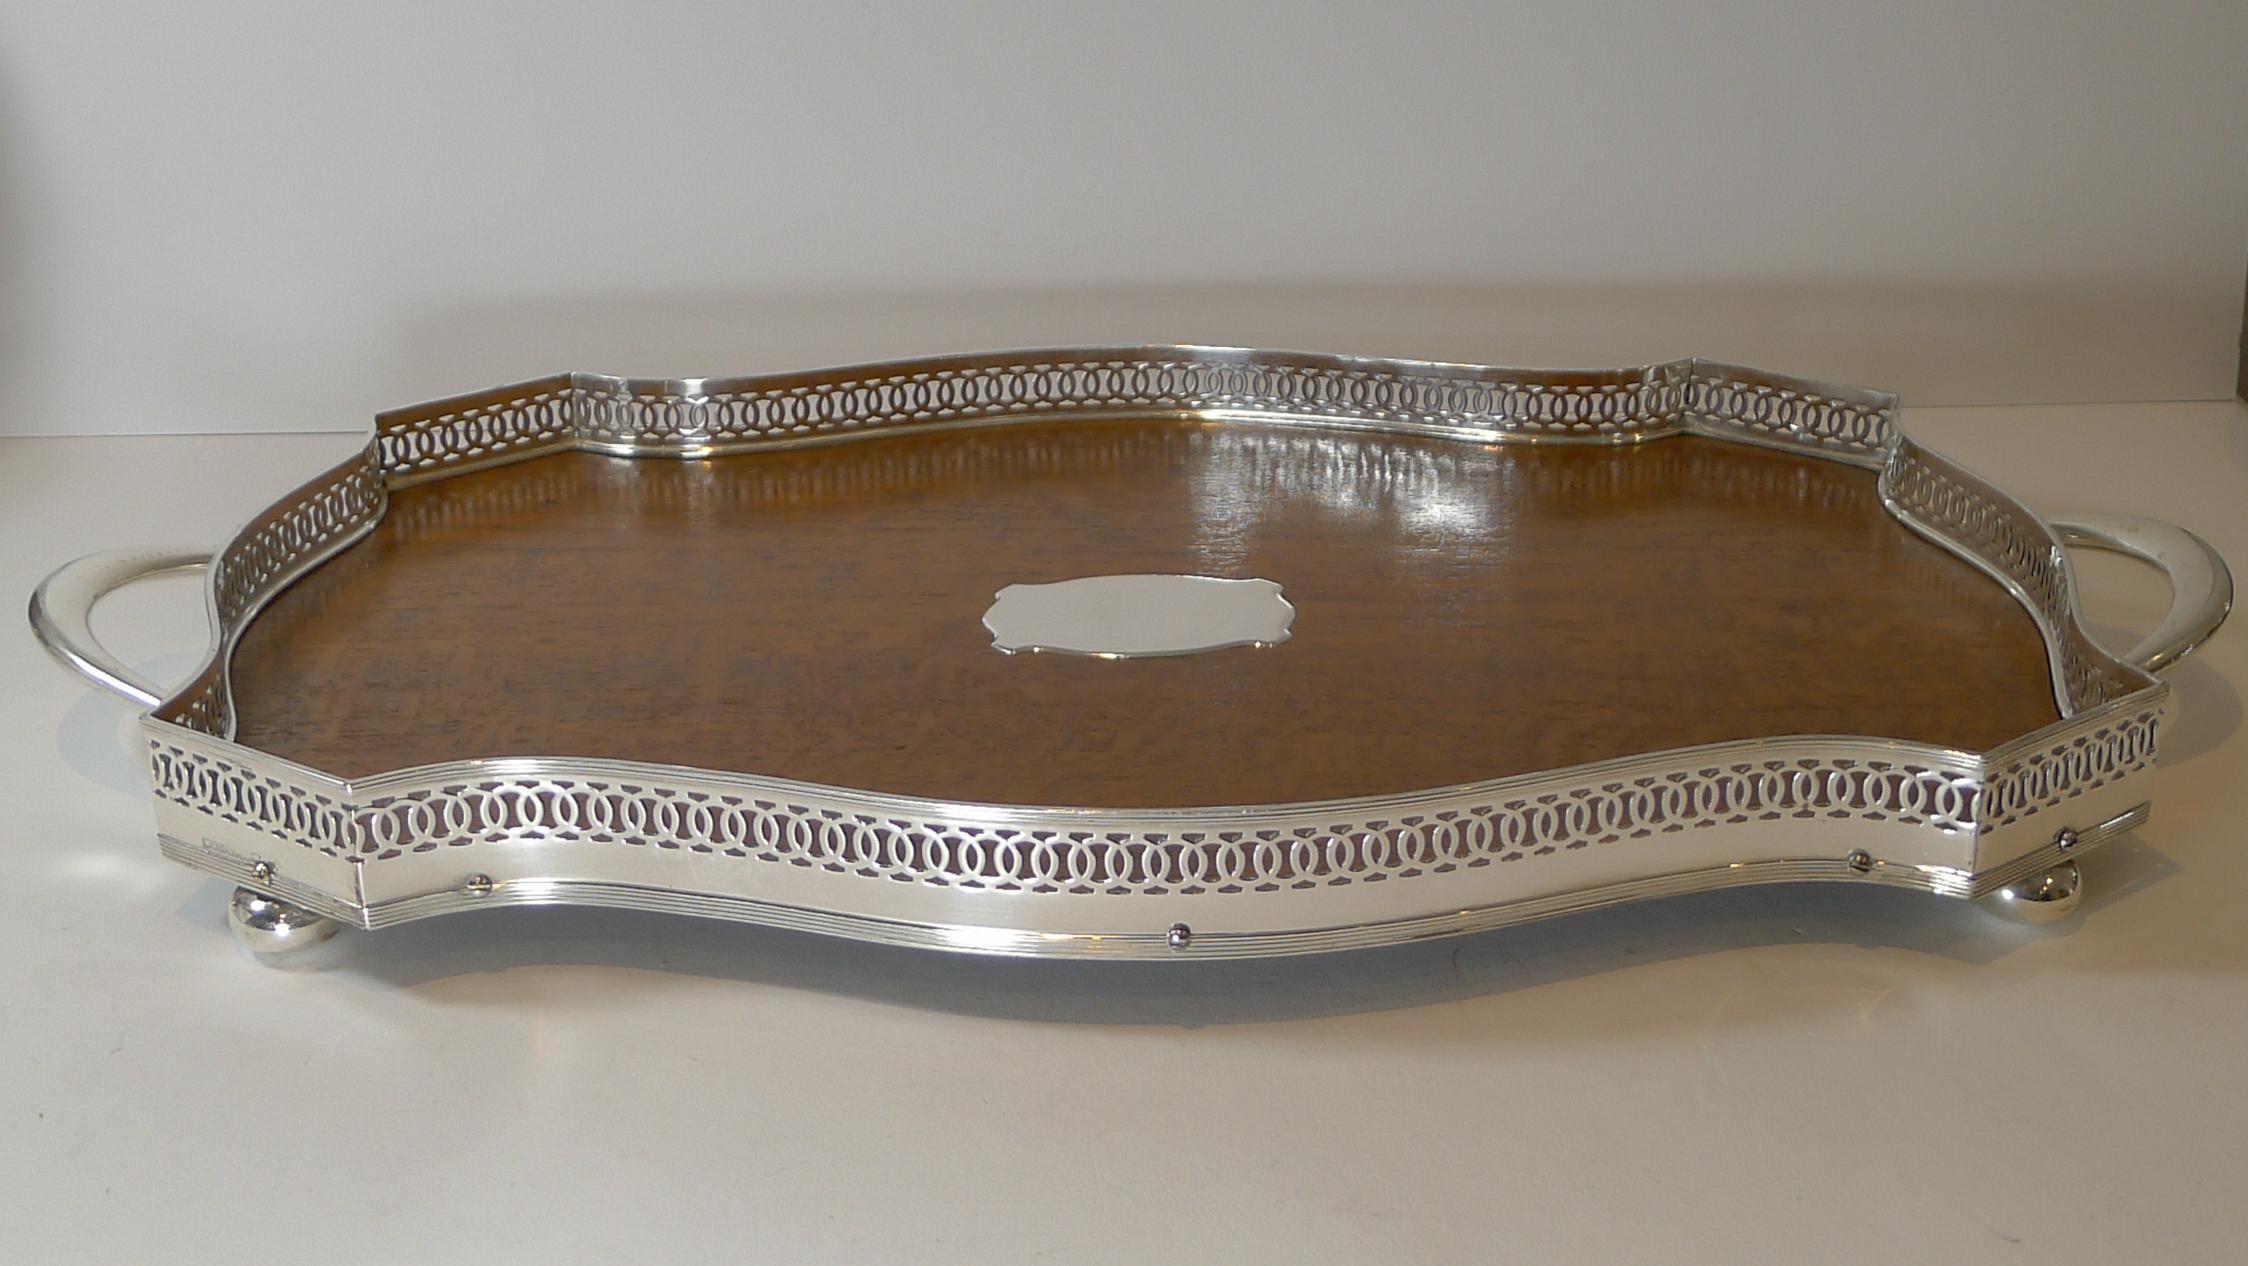 A beautiful antique English drinks / cocktail tray dating to c.1900, late Victorian or early Edwardian.

The shaped tray stands on four bun feet, has two elegant handles and a central vacant cartouche mounted to the centre of the Oak base.

The